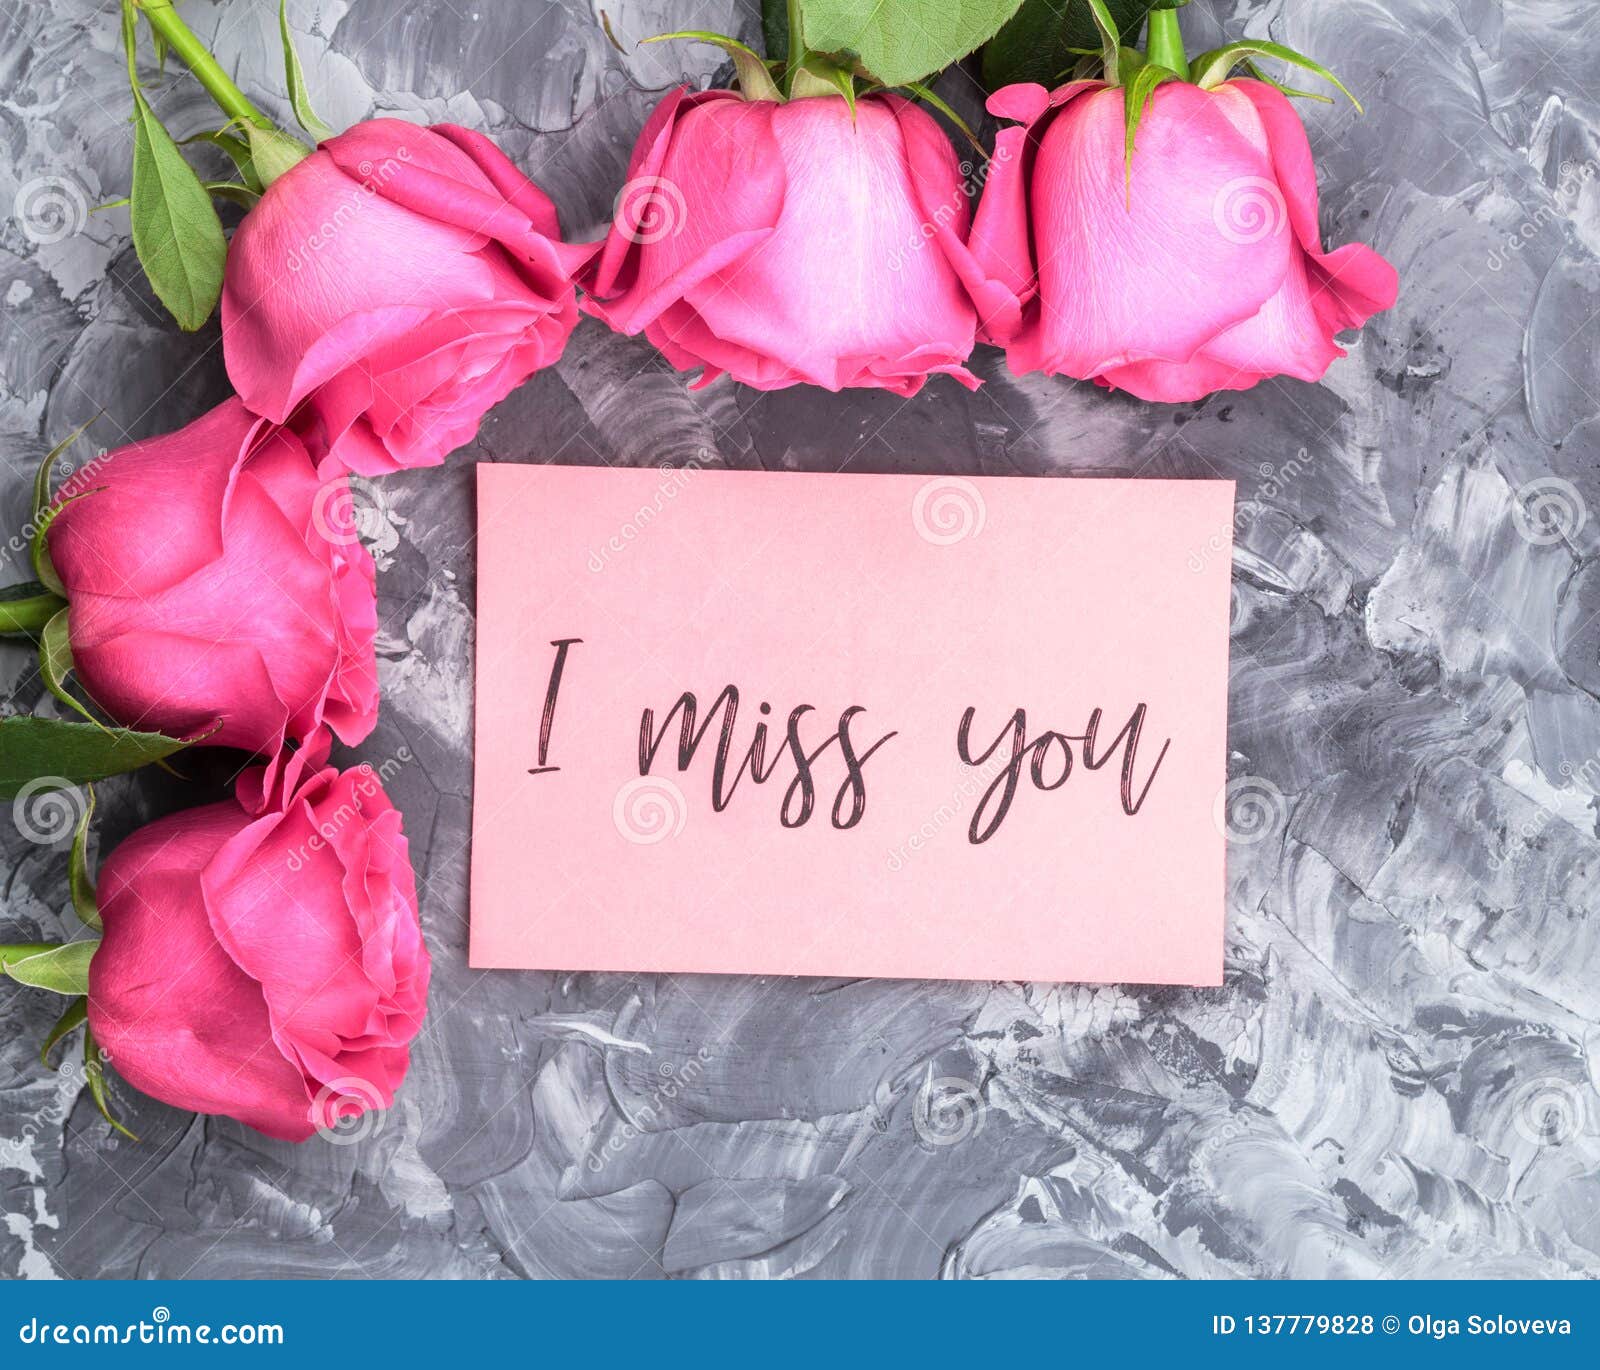 Collection 93+ Images love romantic miss you rose wallpaper Completed